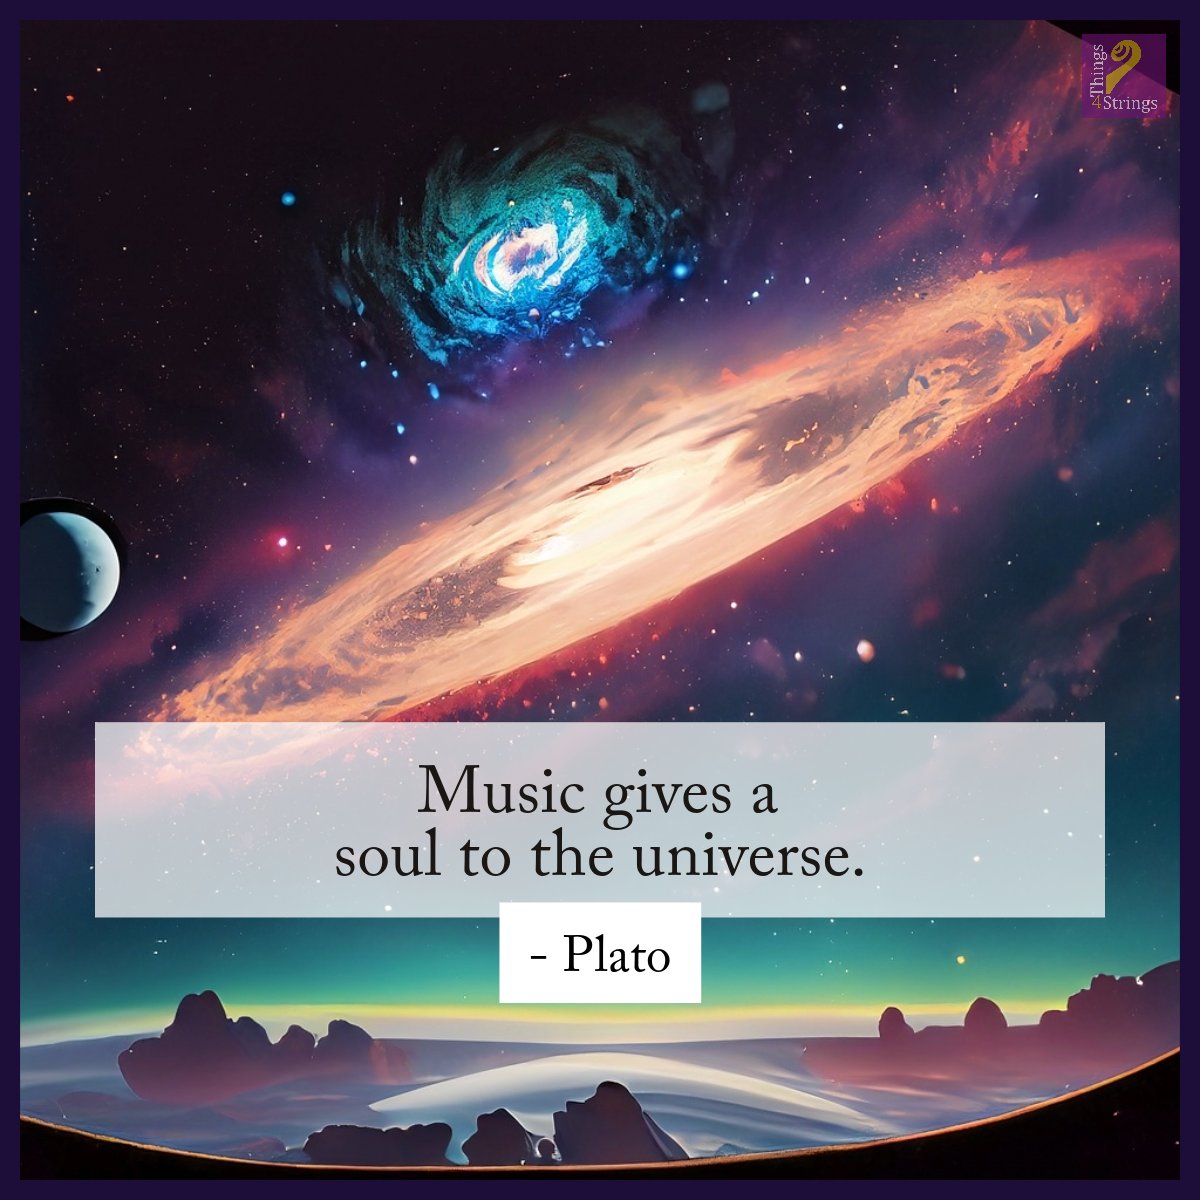 Plato believed music could imitate and influence emotions. He also believed music could impact a person's personality, fostering balanced emotions and improving overall well-being. . . . . #Plato #MusicMatters #BetterSkillsGreaterJoy #MusicQuotes #MusicianQuotes